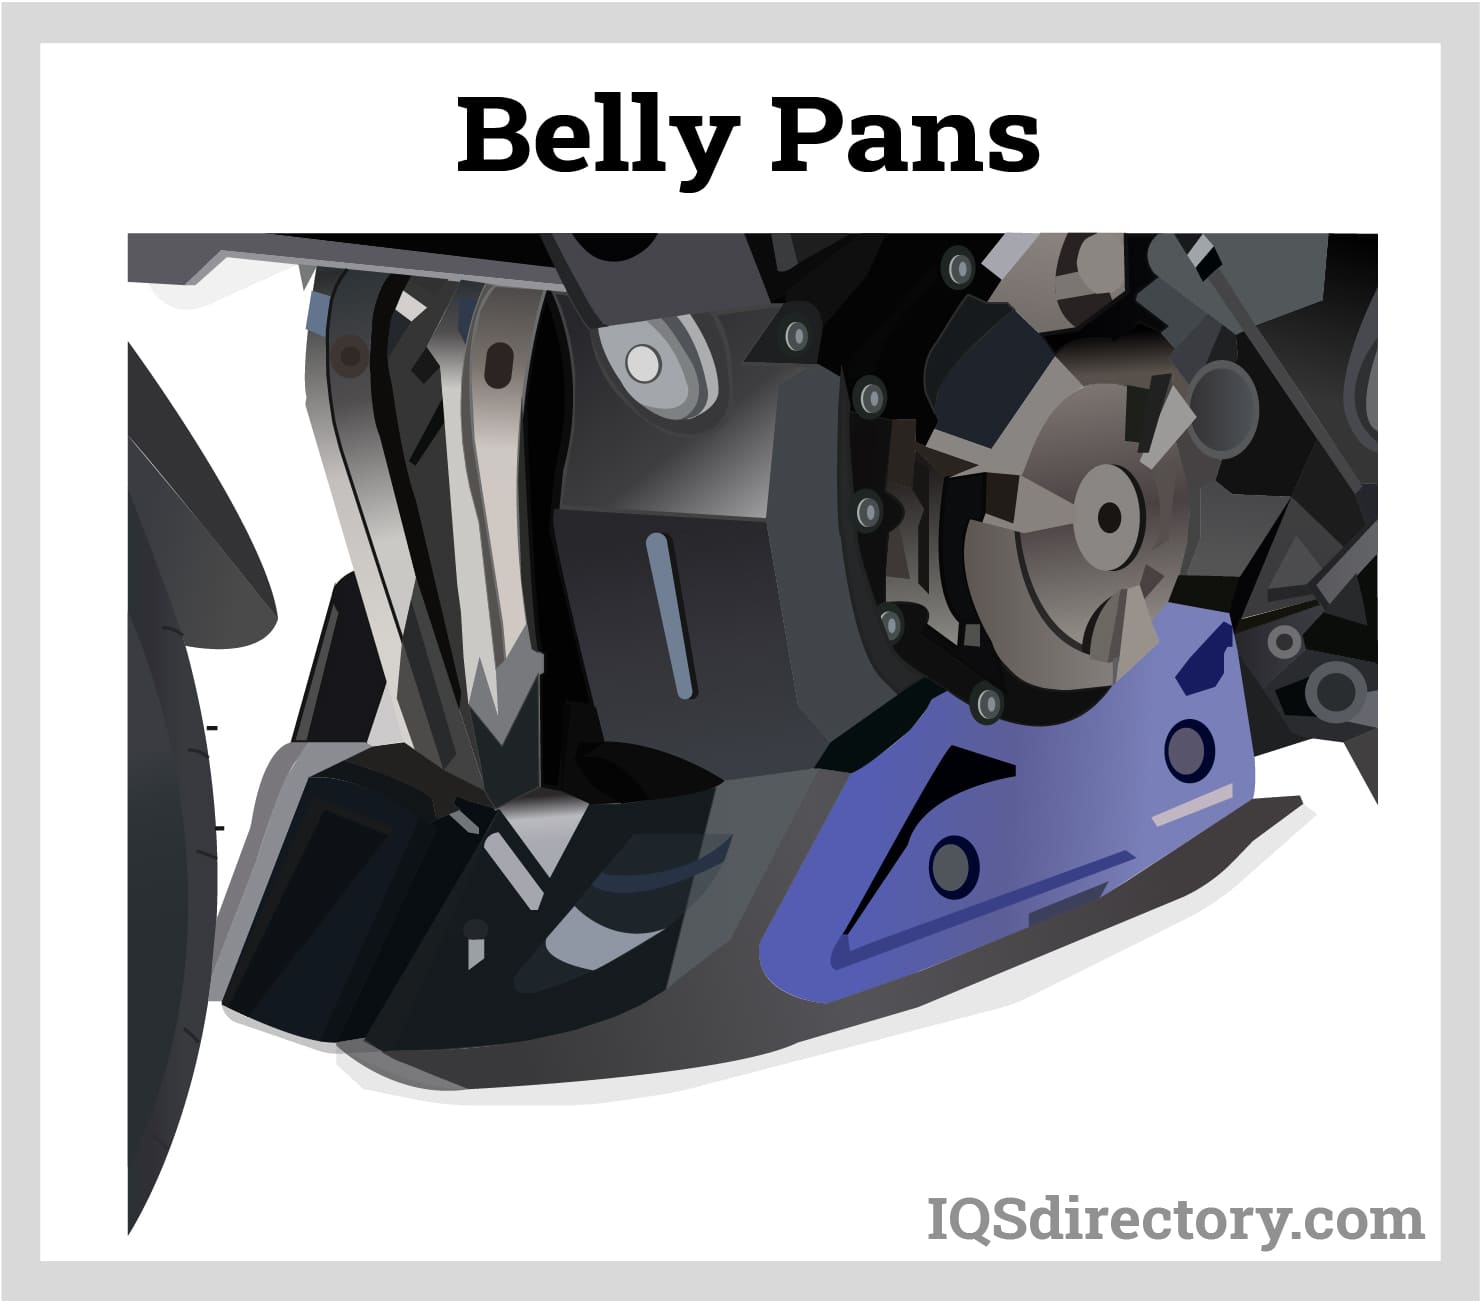 Belly Pans